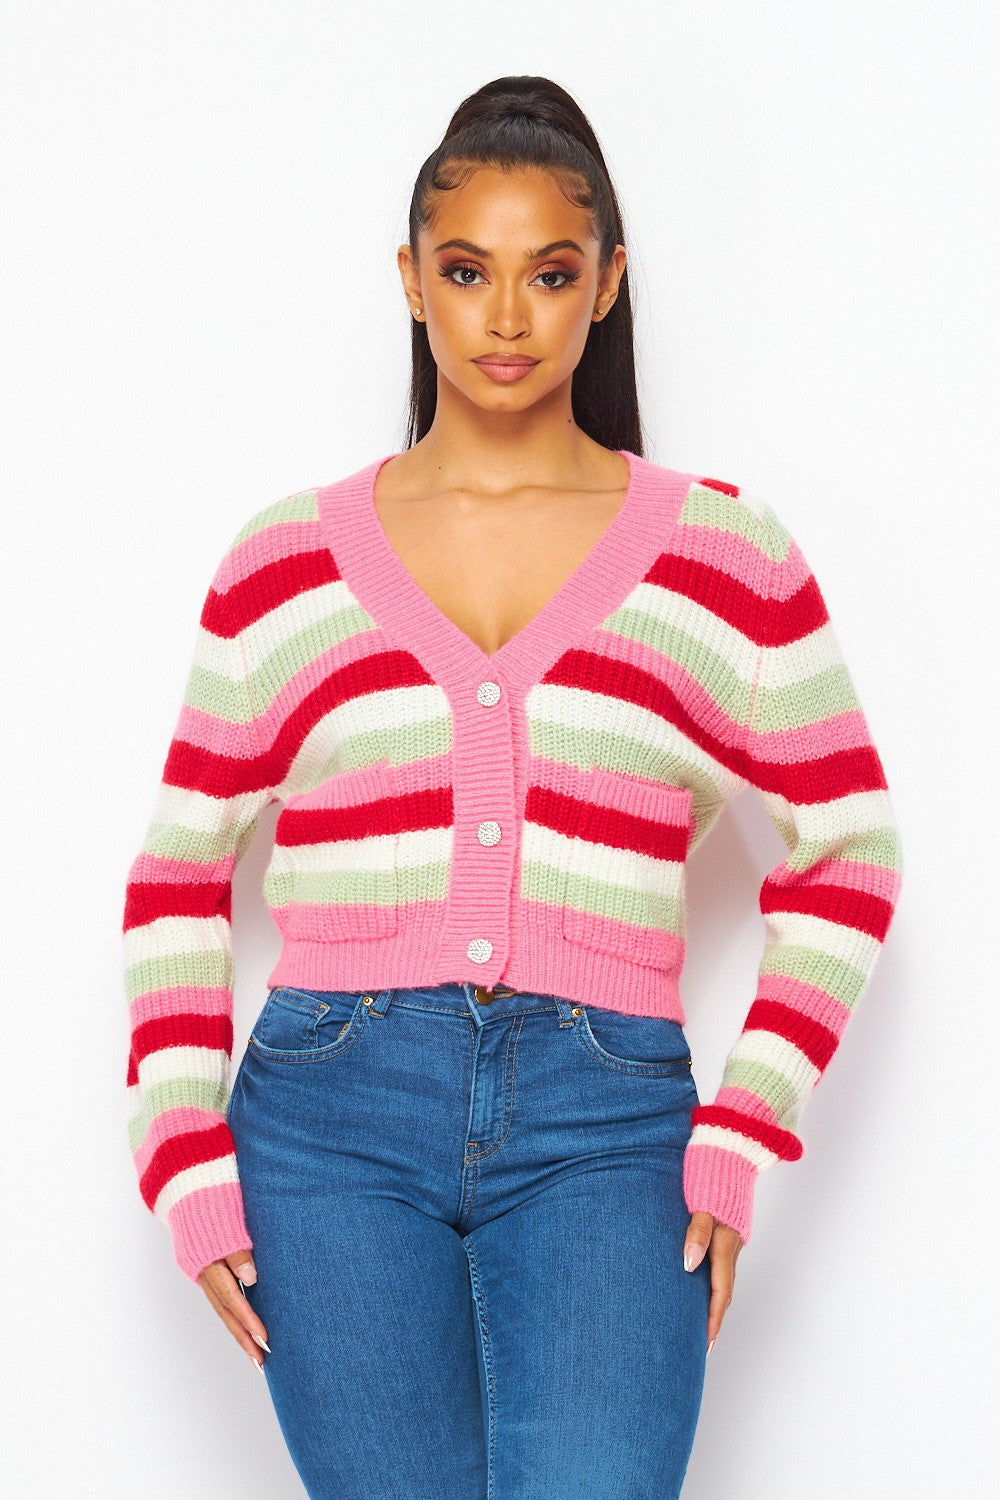 Just Like Candy Multi Color Striped Cardigan